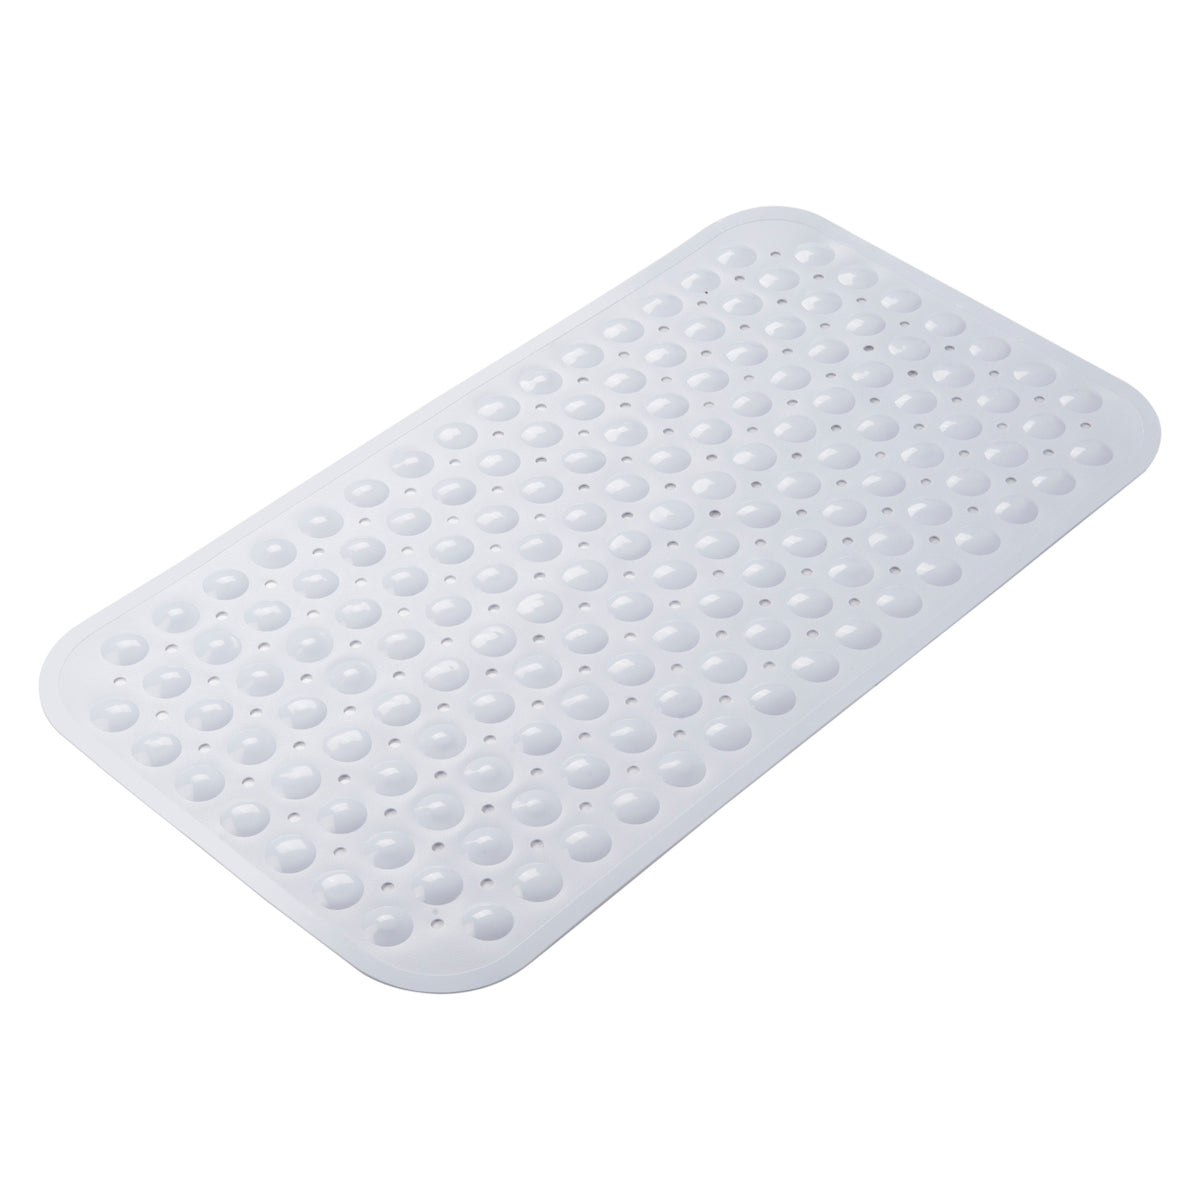 Bathtub Mat Non Slip, Bath Mat for Tub with Drain Holes Suction Cups,Shower  Mats for Inside Shower, Machine Washable, Quick Drying Easy Cleaning, Foot